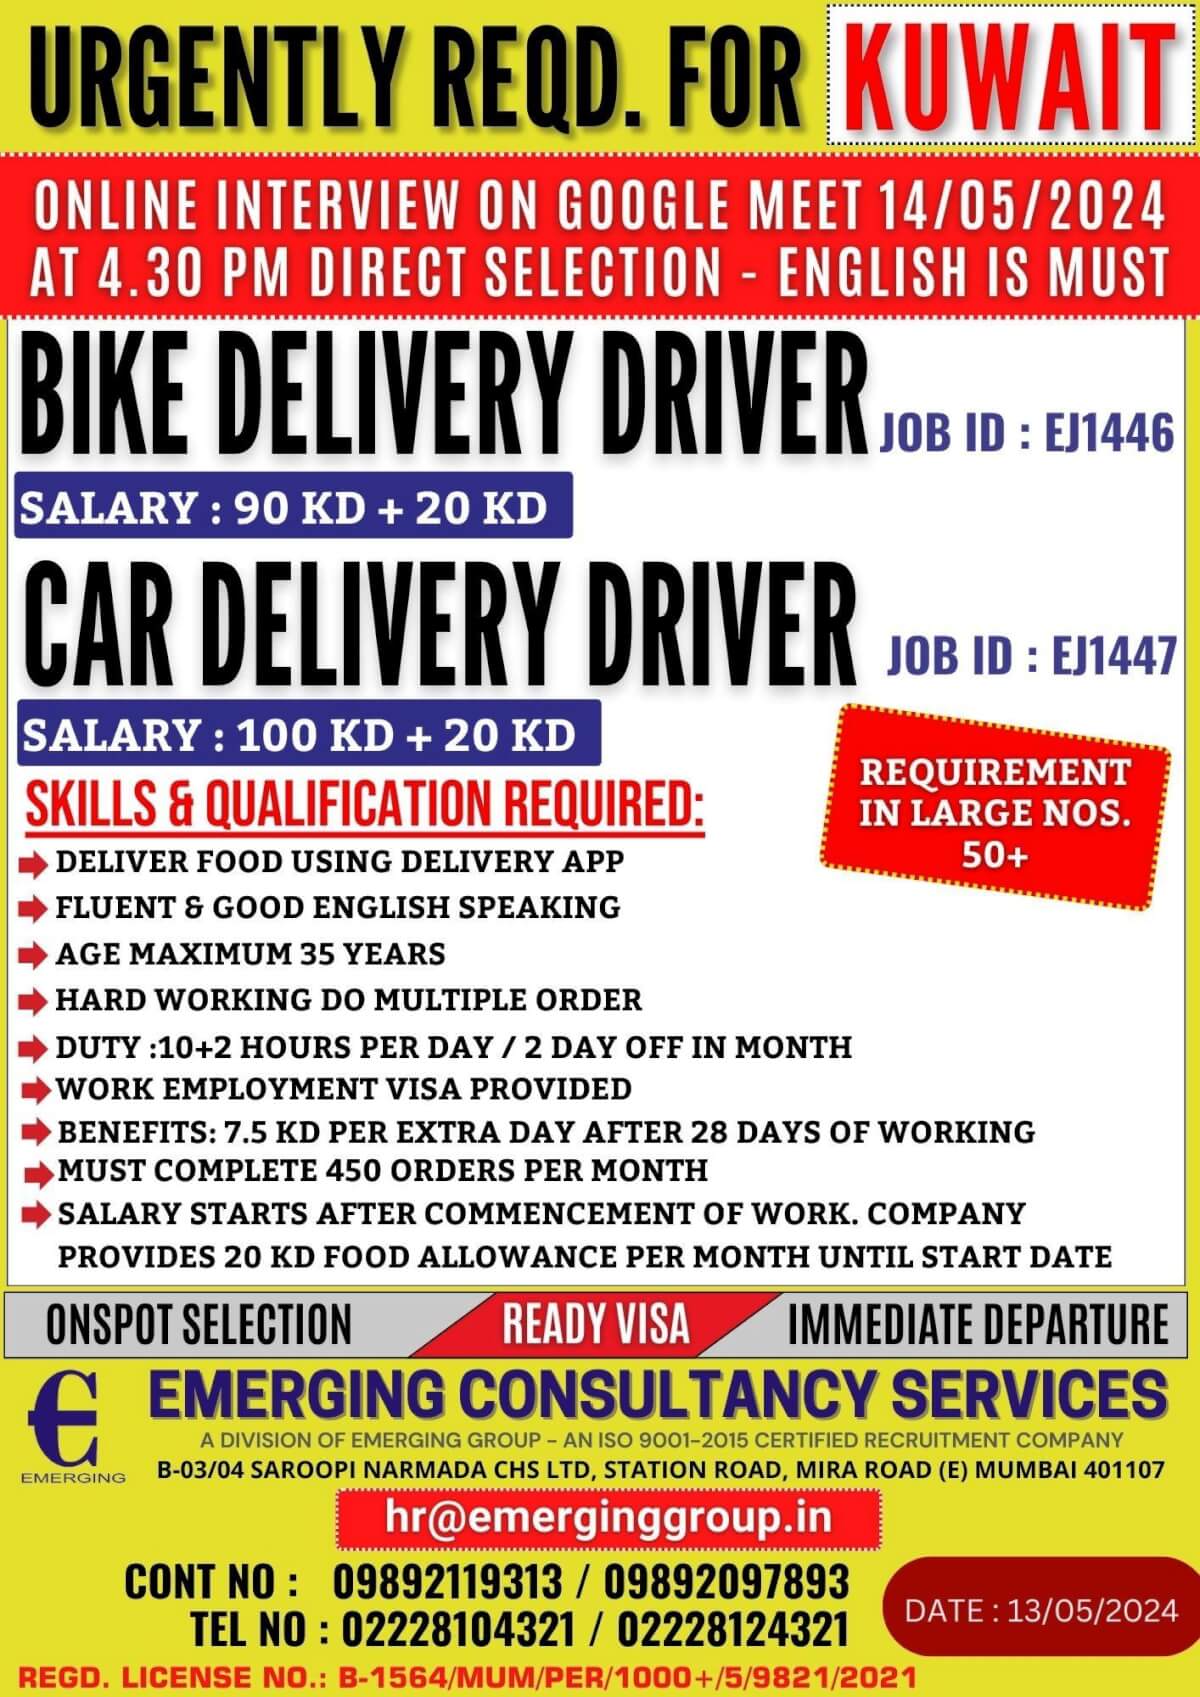 Delivery Driver – Urgently Reqd. for Kuwait